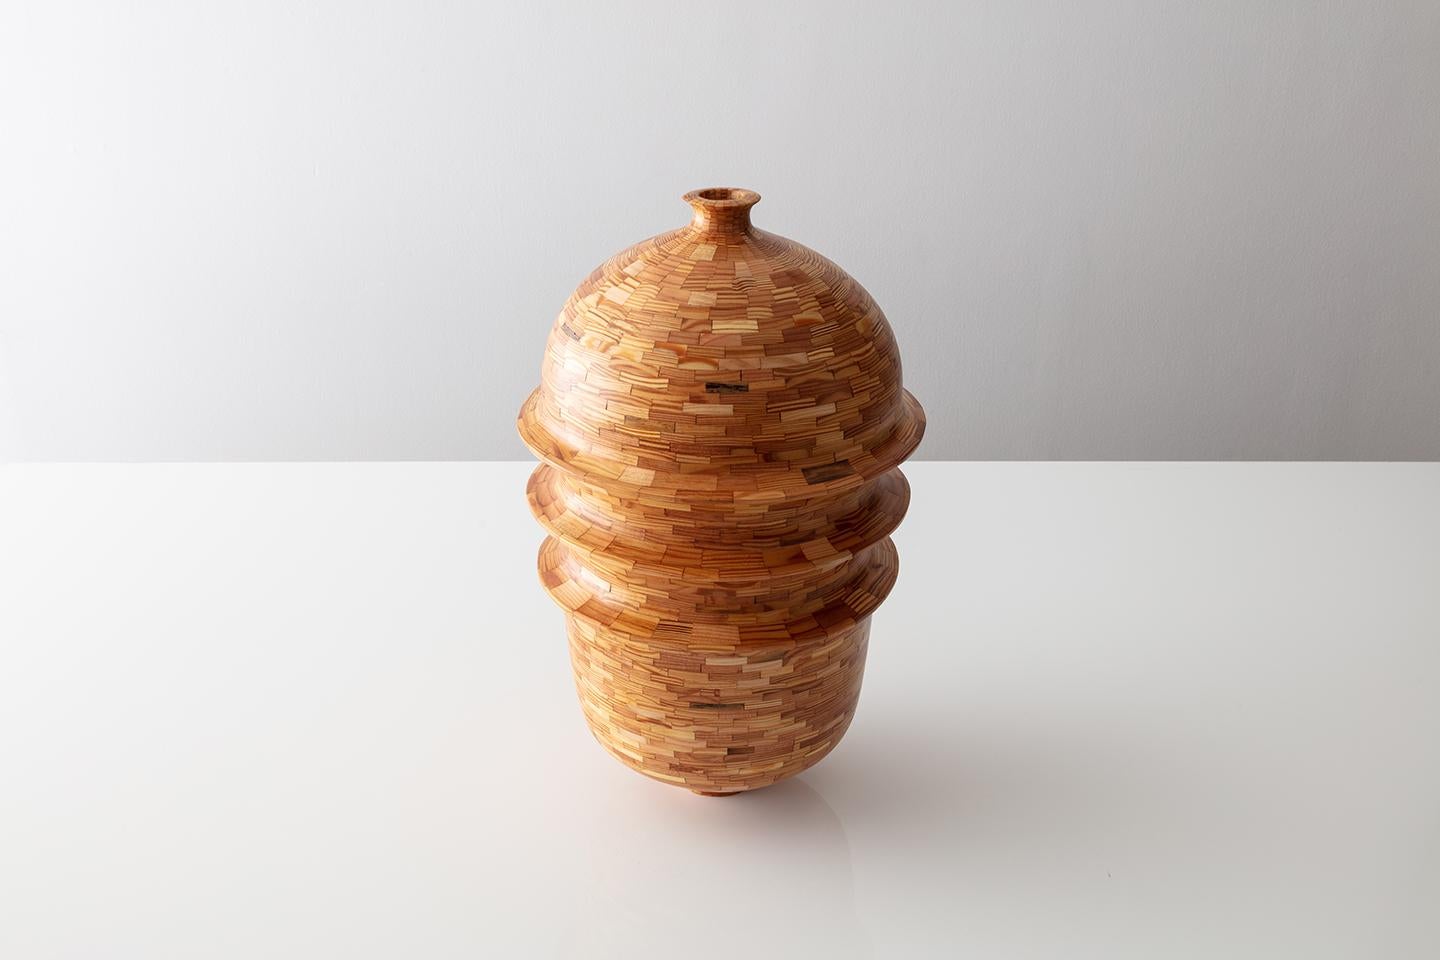 Part of Richard Haining's STACKED Collection, this Three Ringed Vase was made using reclaimed Heart Pine from building joists salvaged from a gutted Brooklyn Brownstone's. These NYC Brownstone’s are all Pre-War, built in the late 1800’s which in